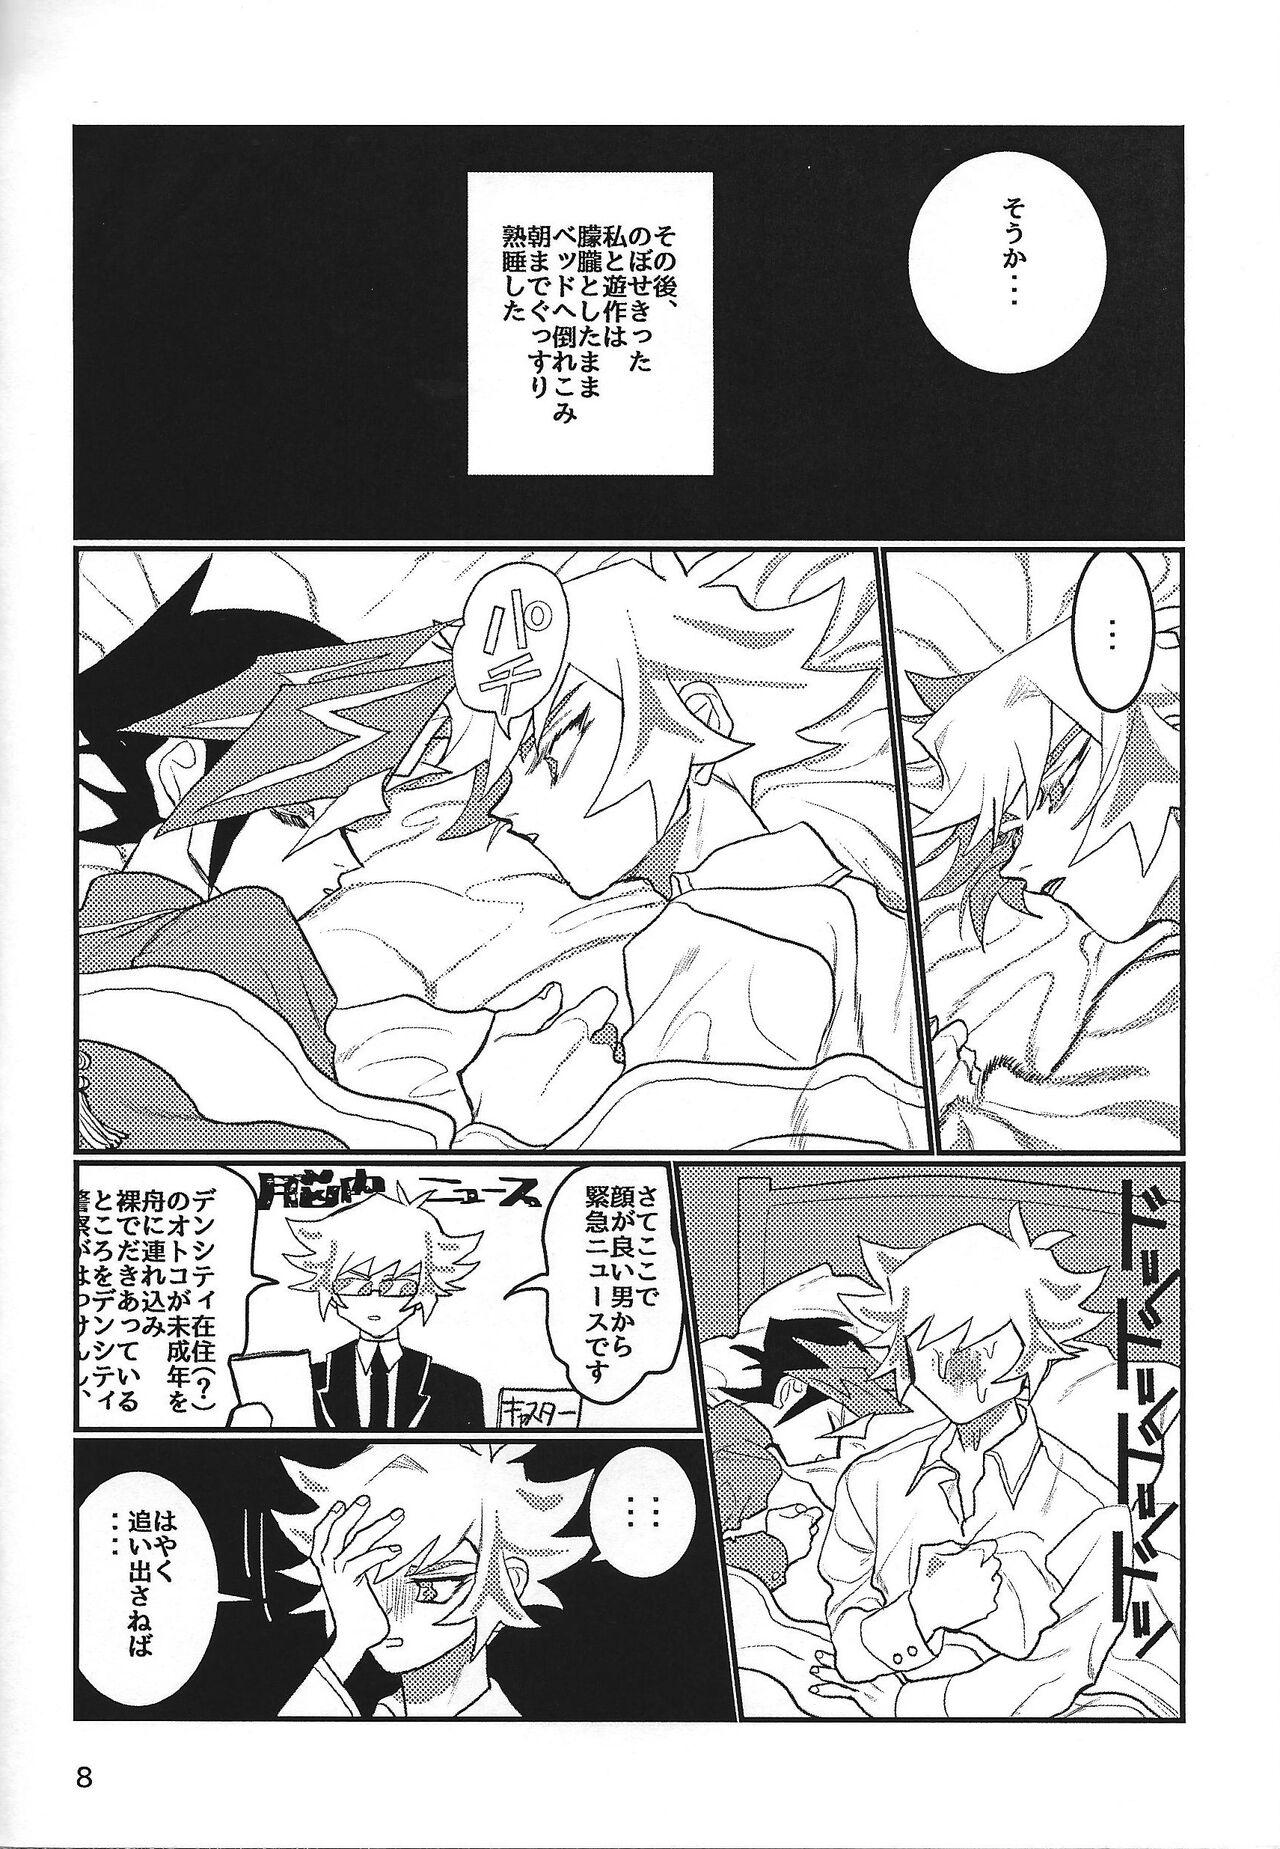 Celebrity Nudes LOTUS - Yu-gi-oh vrains Massages - Page 9